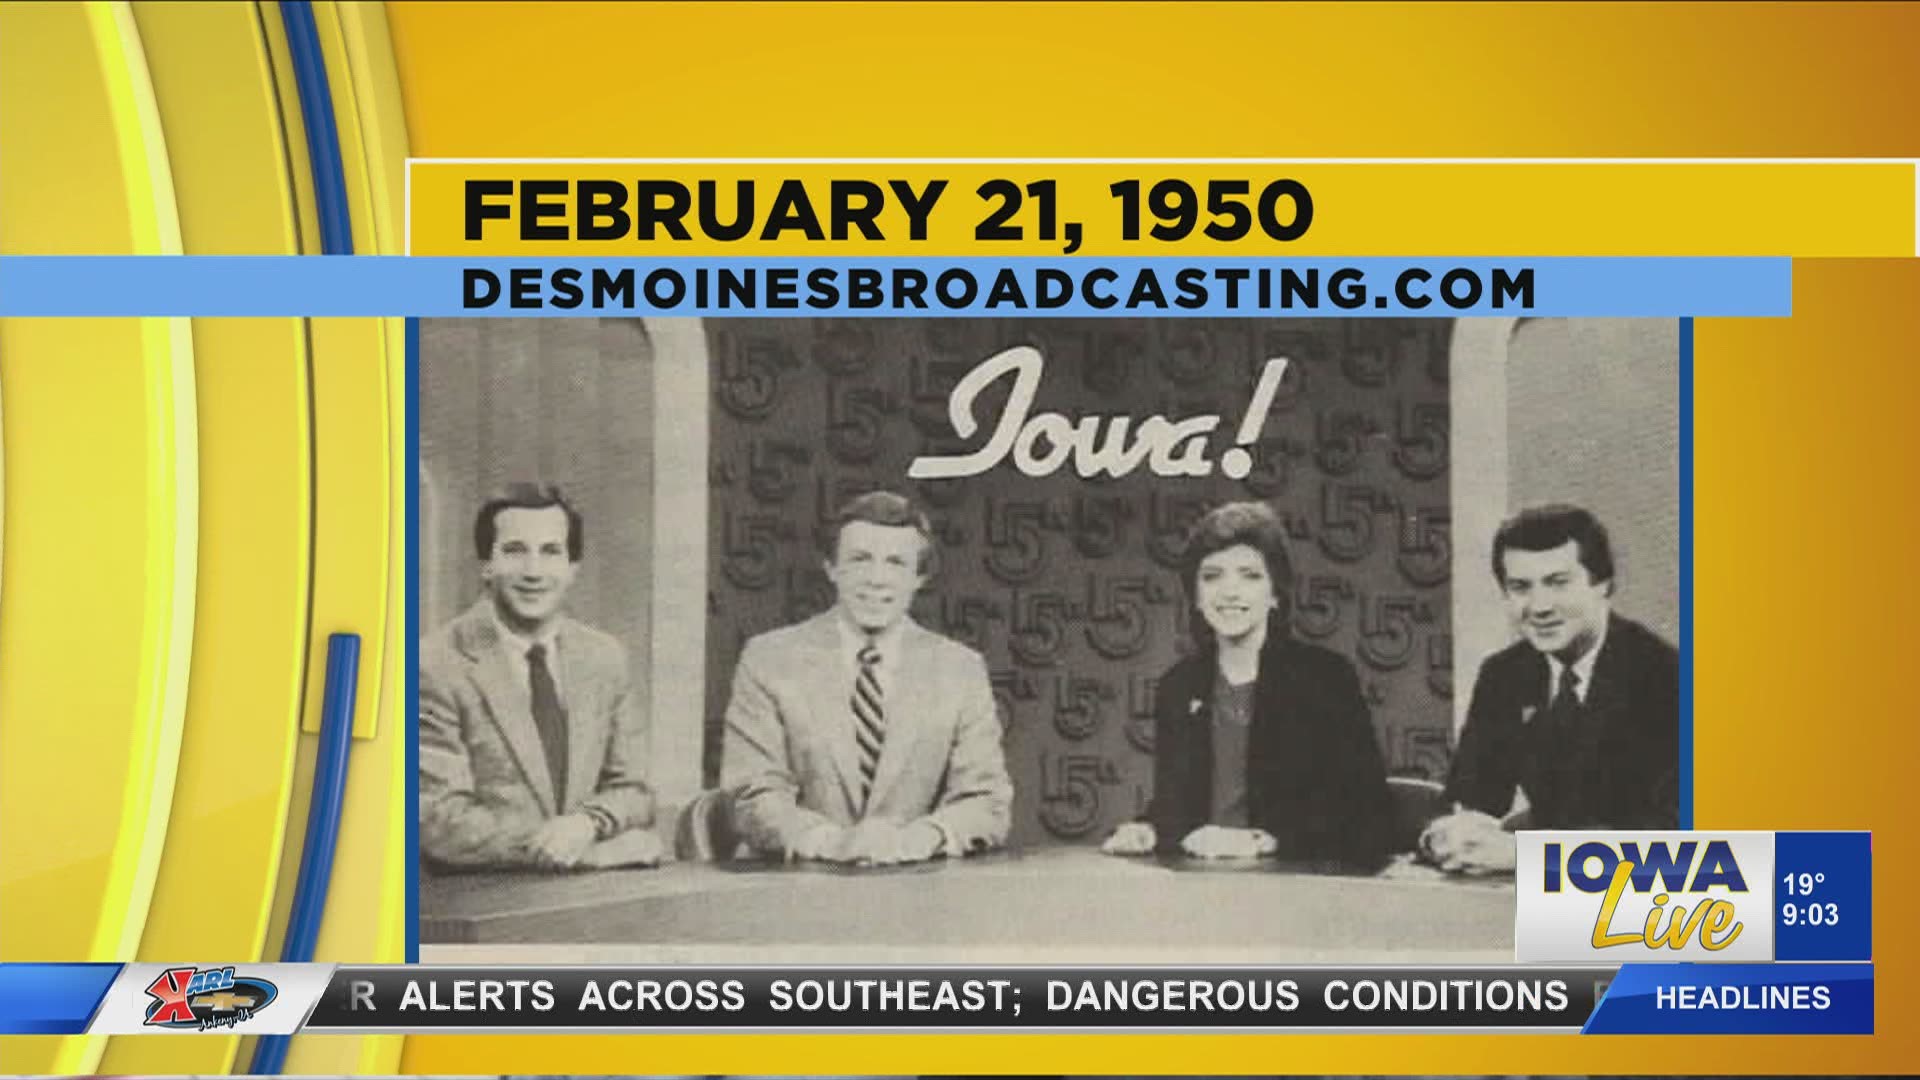 Professor Jeff Stein explains the history of the oldest TV station in Central Iowa, WOI